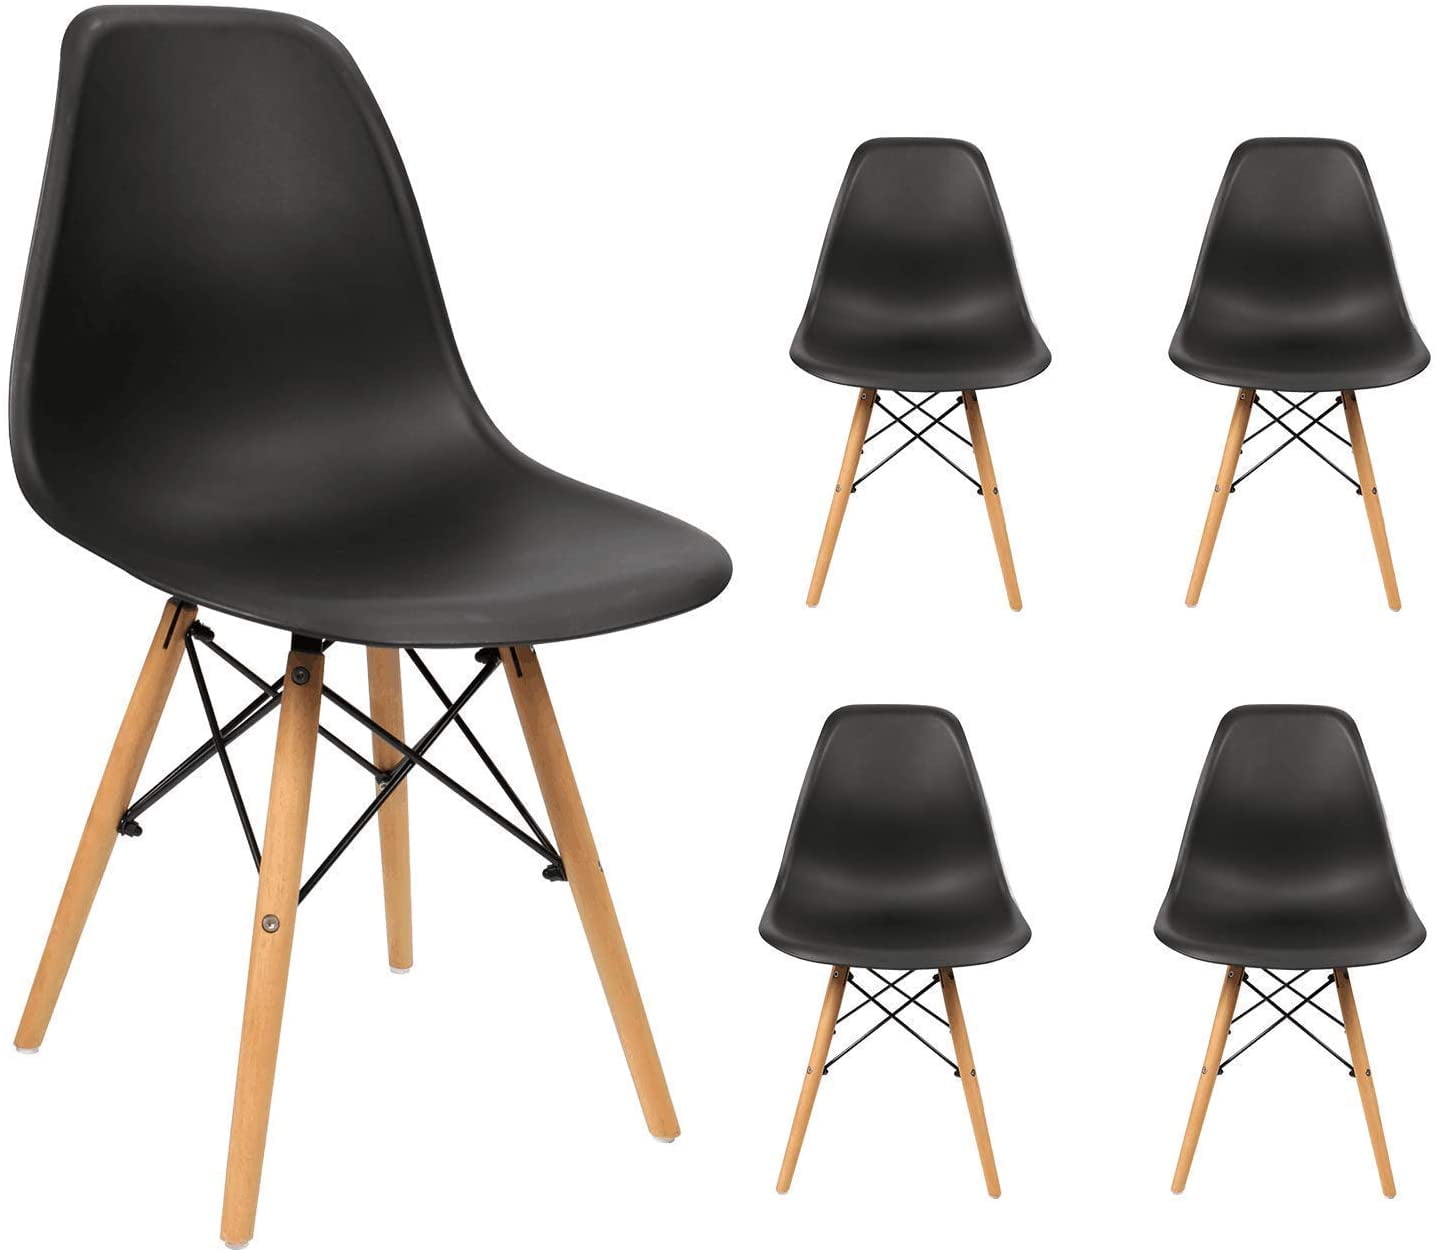 Vineego 4 Pcs Dining Chairs Pre, Pre Assembled Dining Room Chairs